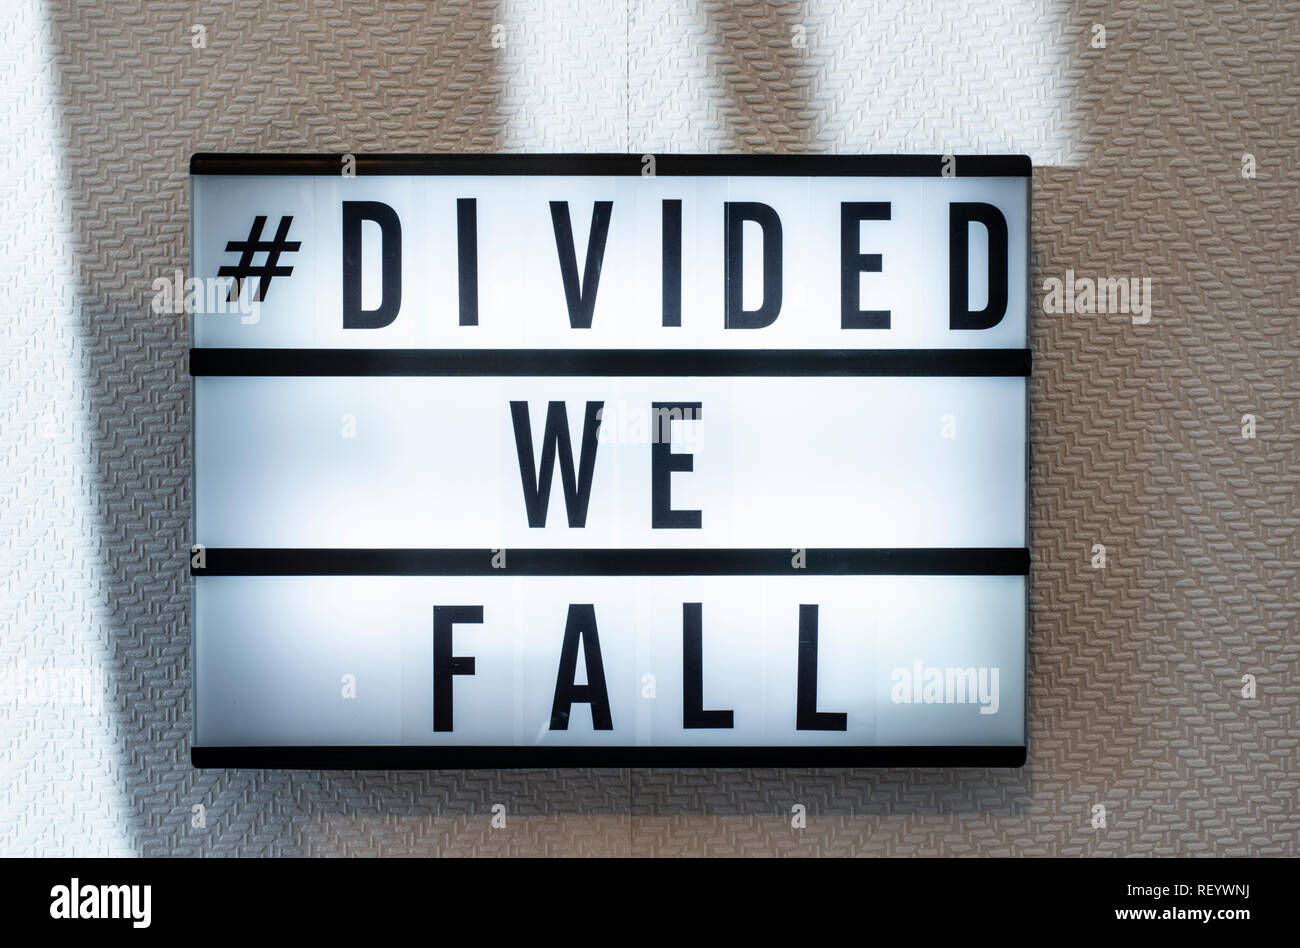 Message divided we fall on illuminated board. Divided nation concept with text. Daylight from window. Room interior. Black letters #divided we fall on Stock Photo